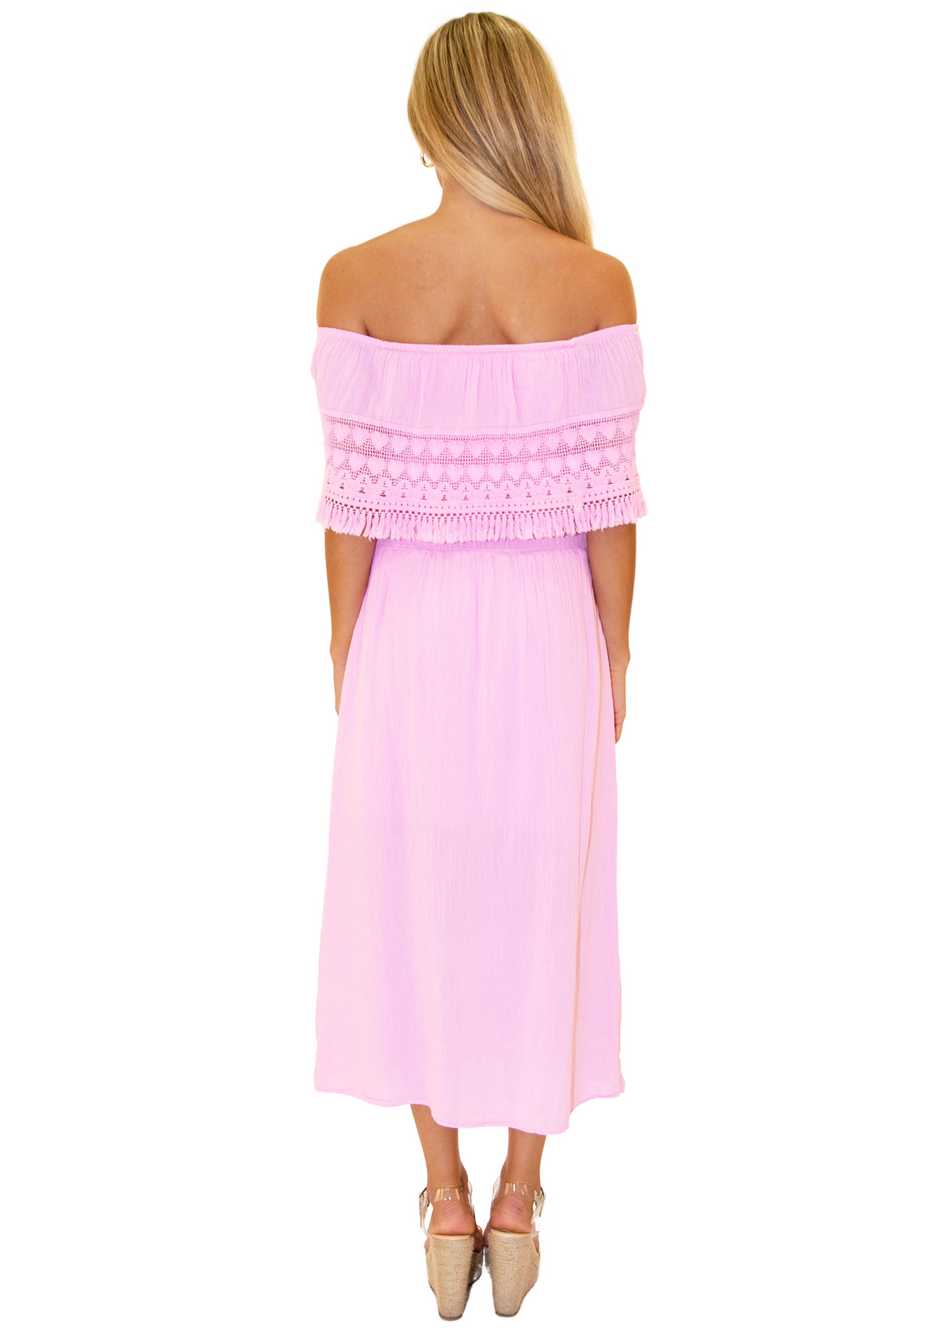 NW1079 - Pink Cotton Dress